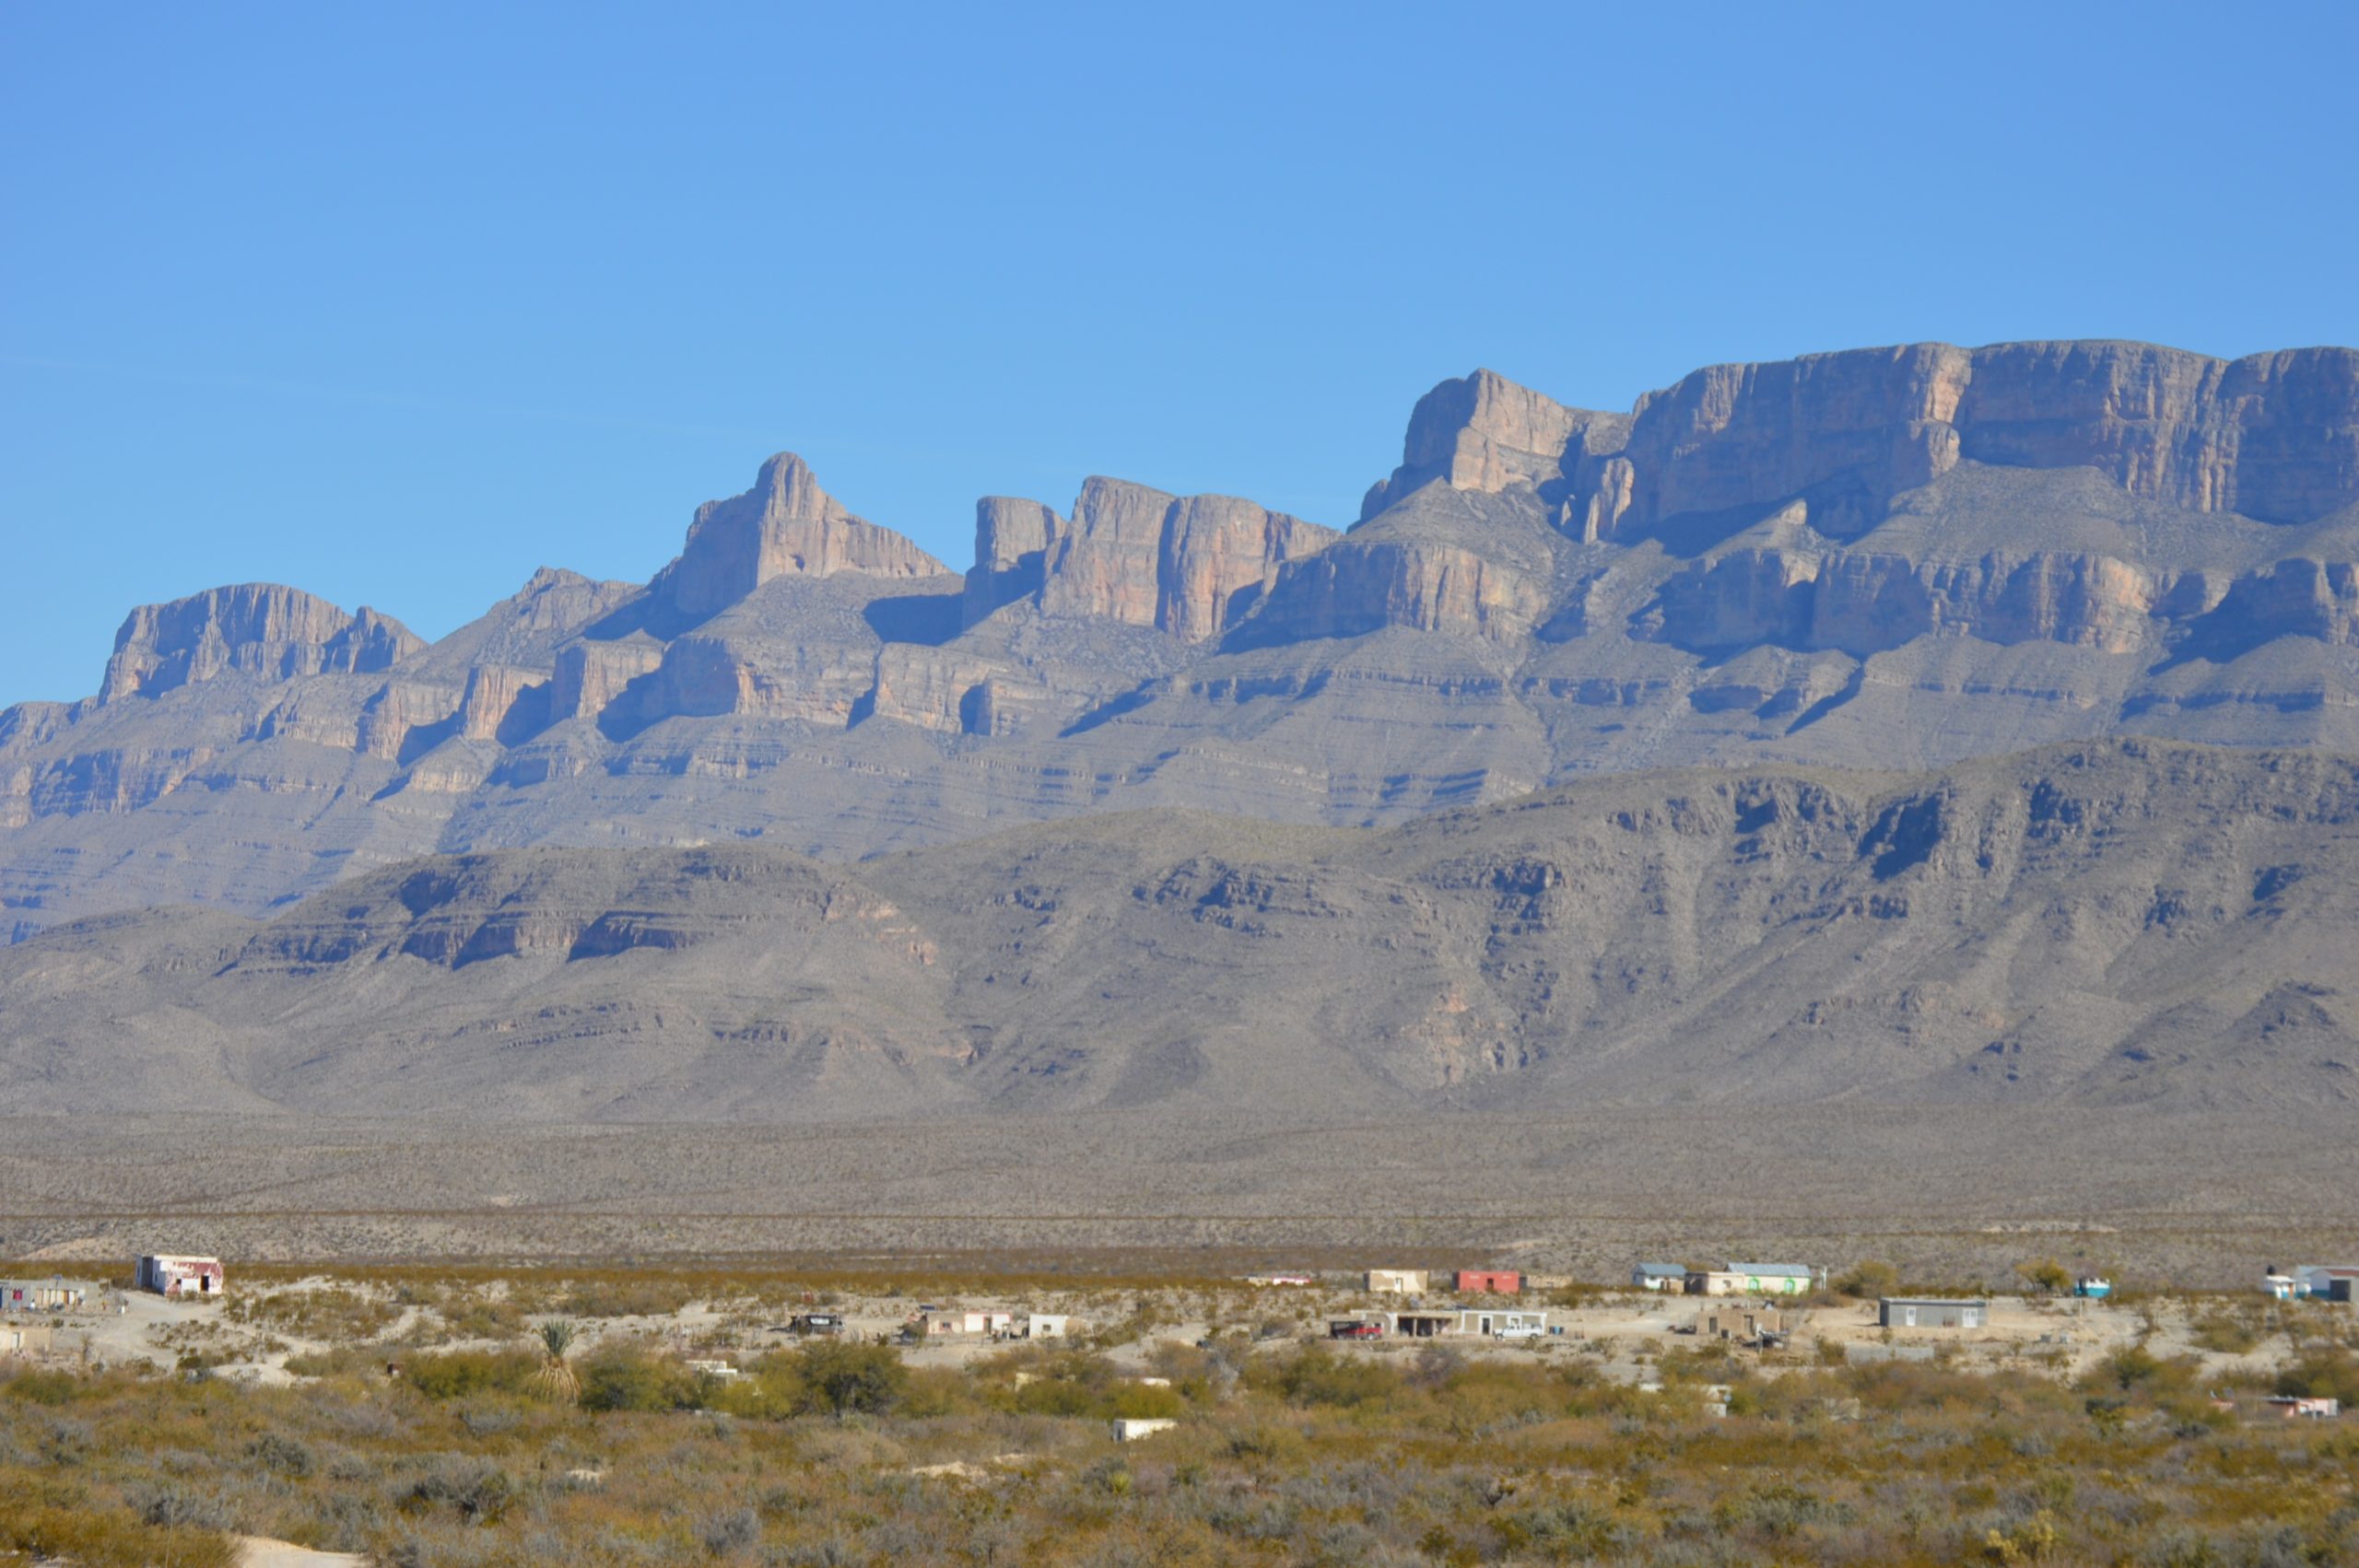 Small Community at the base of a line of mountains, near Boquillas, Mexico.